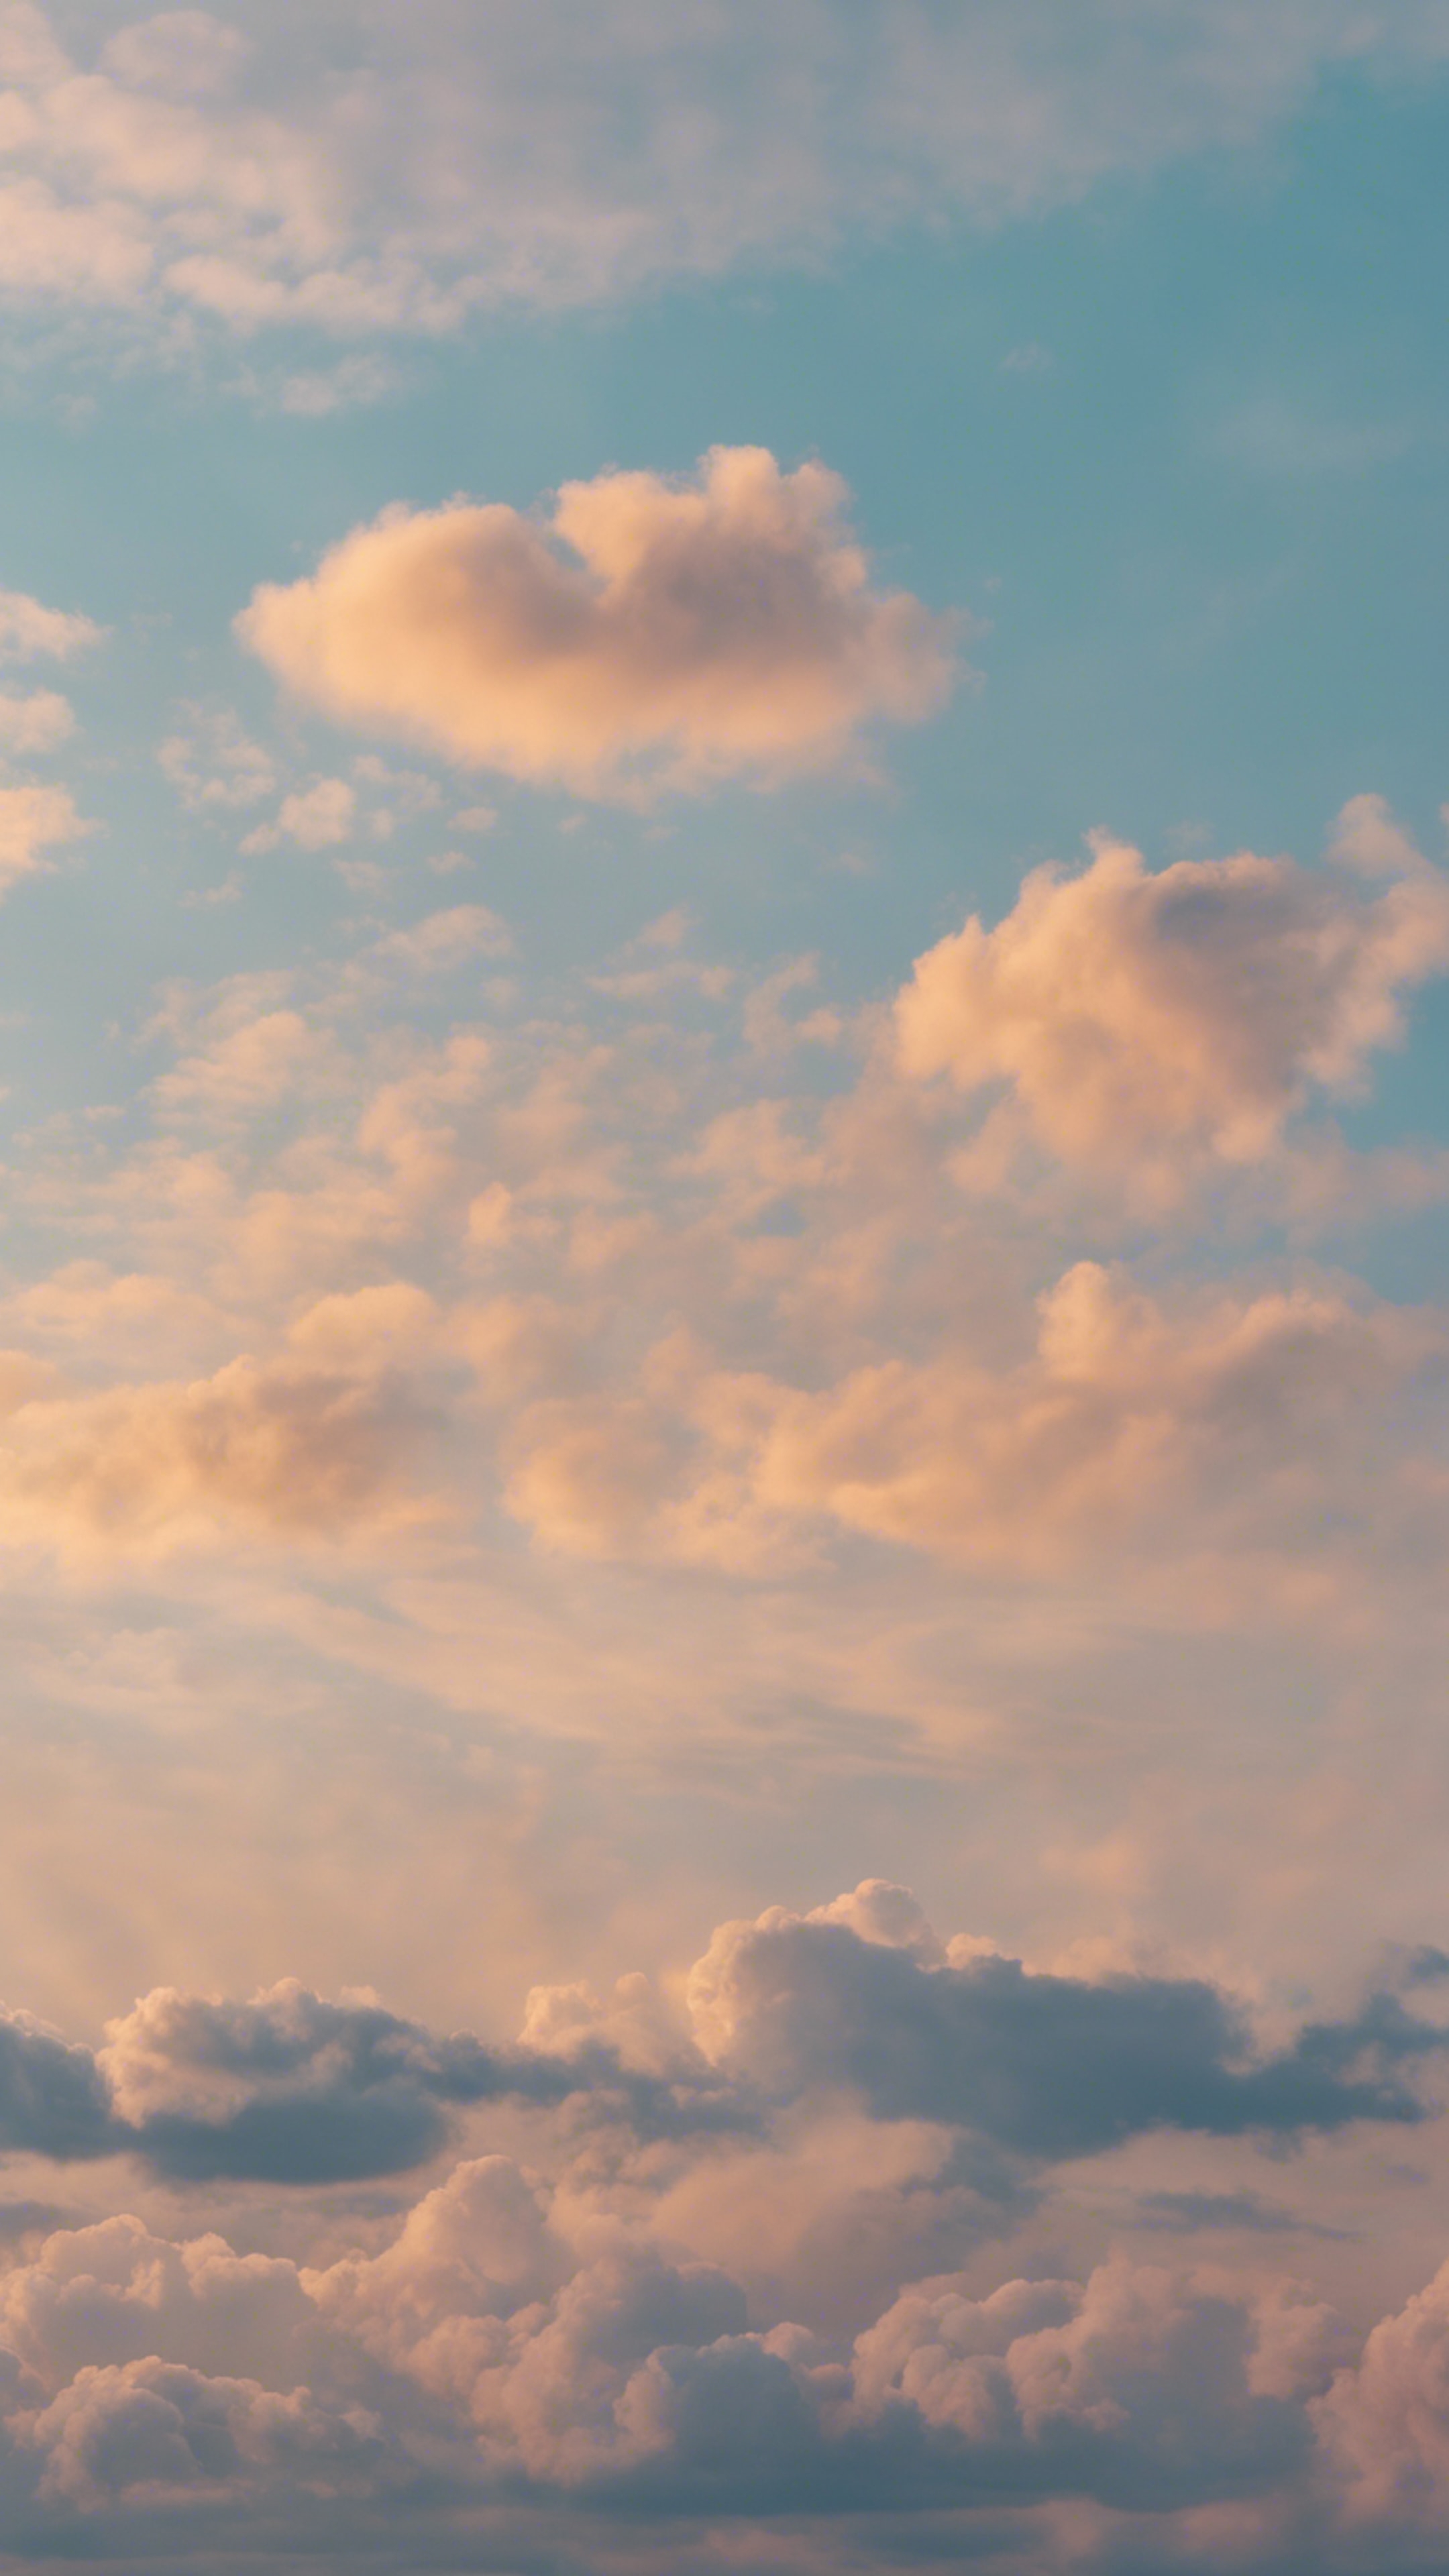 A pastel blue sky at sunrise with a couple of lonely clouds.壁紙[94611246745b4de3a7df]